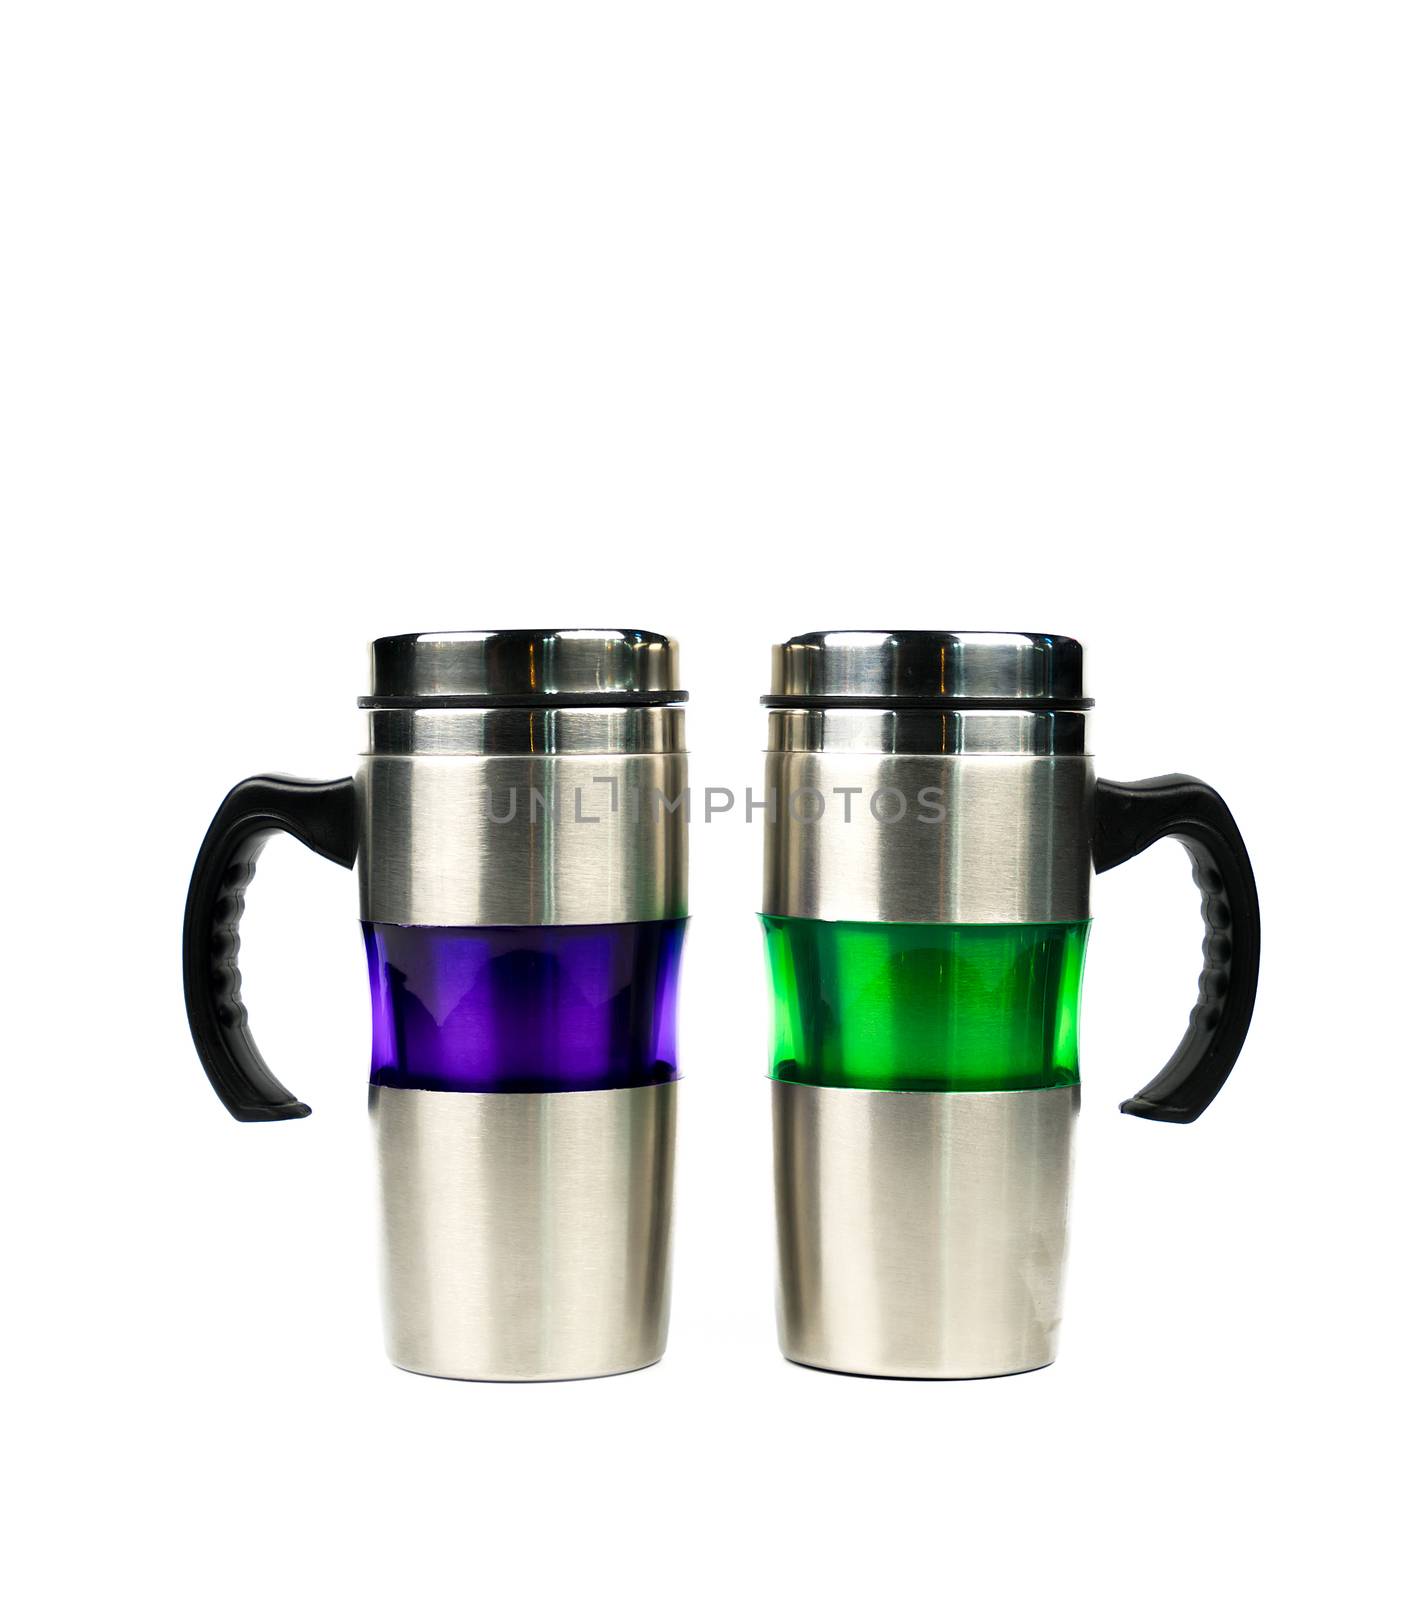 Purple and green thermos bottle with handle isolated on white background with copy space